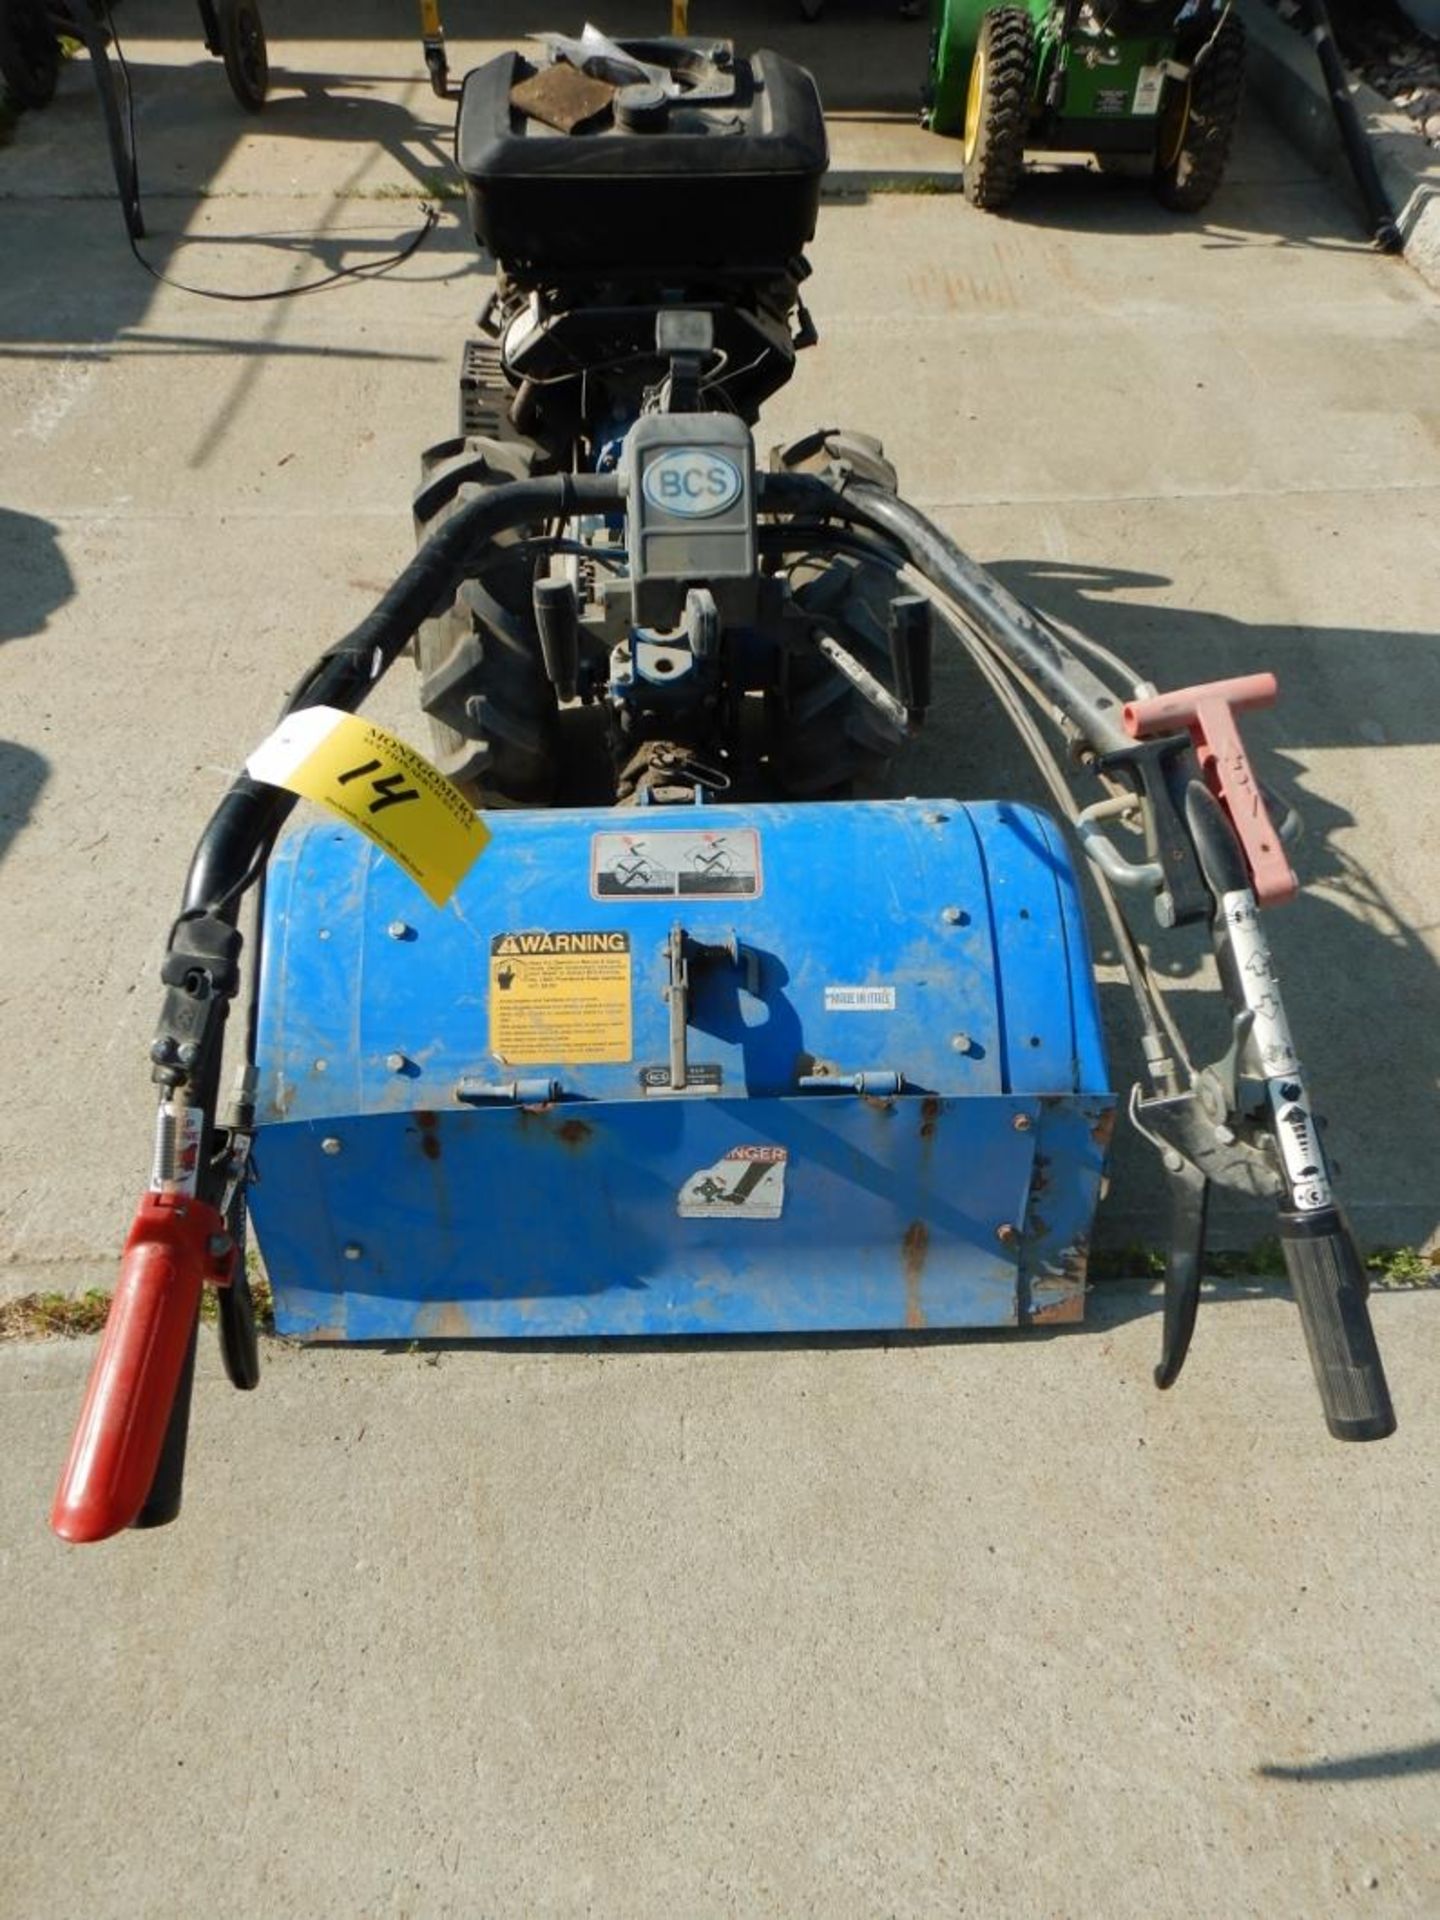 BSC PROFESSIONAL 850 SP REAR TINE ROTOTILLER - 28IN W/ 14HP VANGUARD ENGINE W/ OPTIONAL RIDE ON - Image 5 of 11